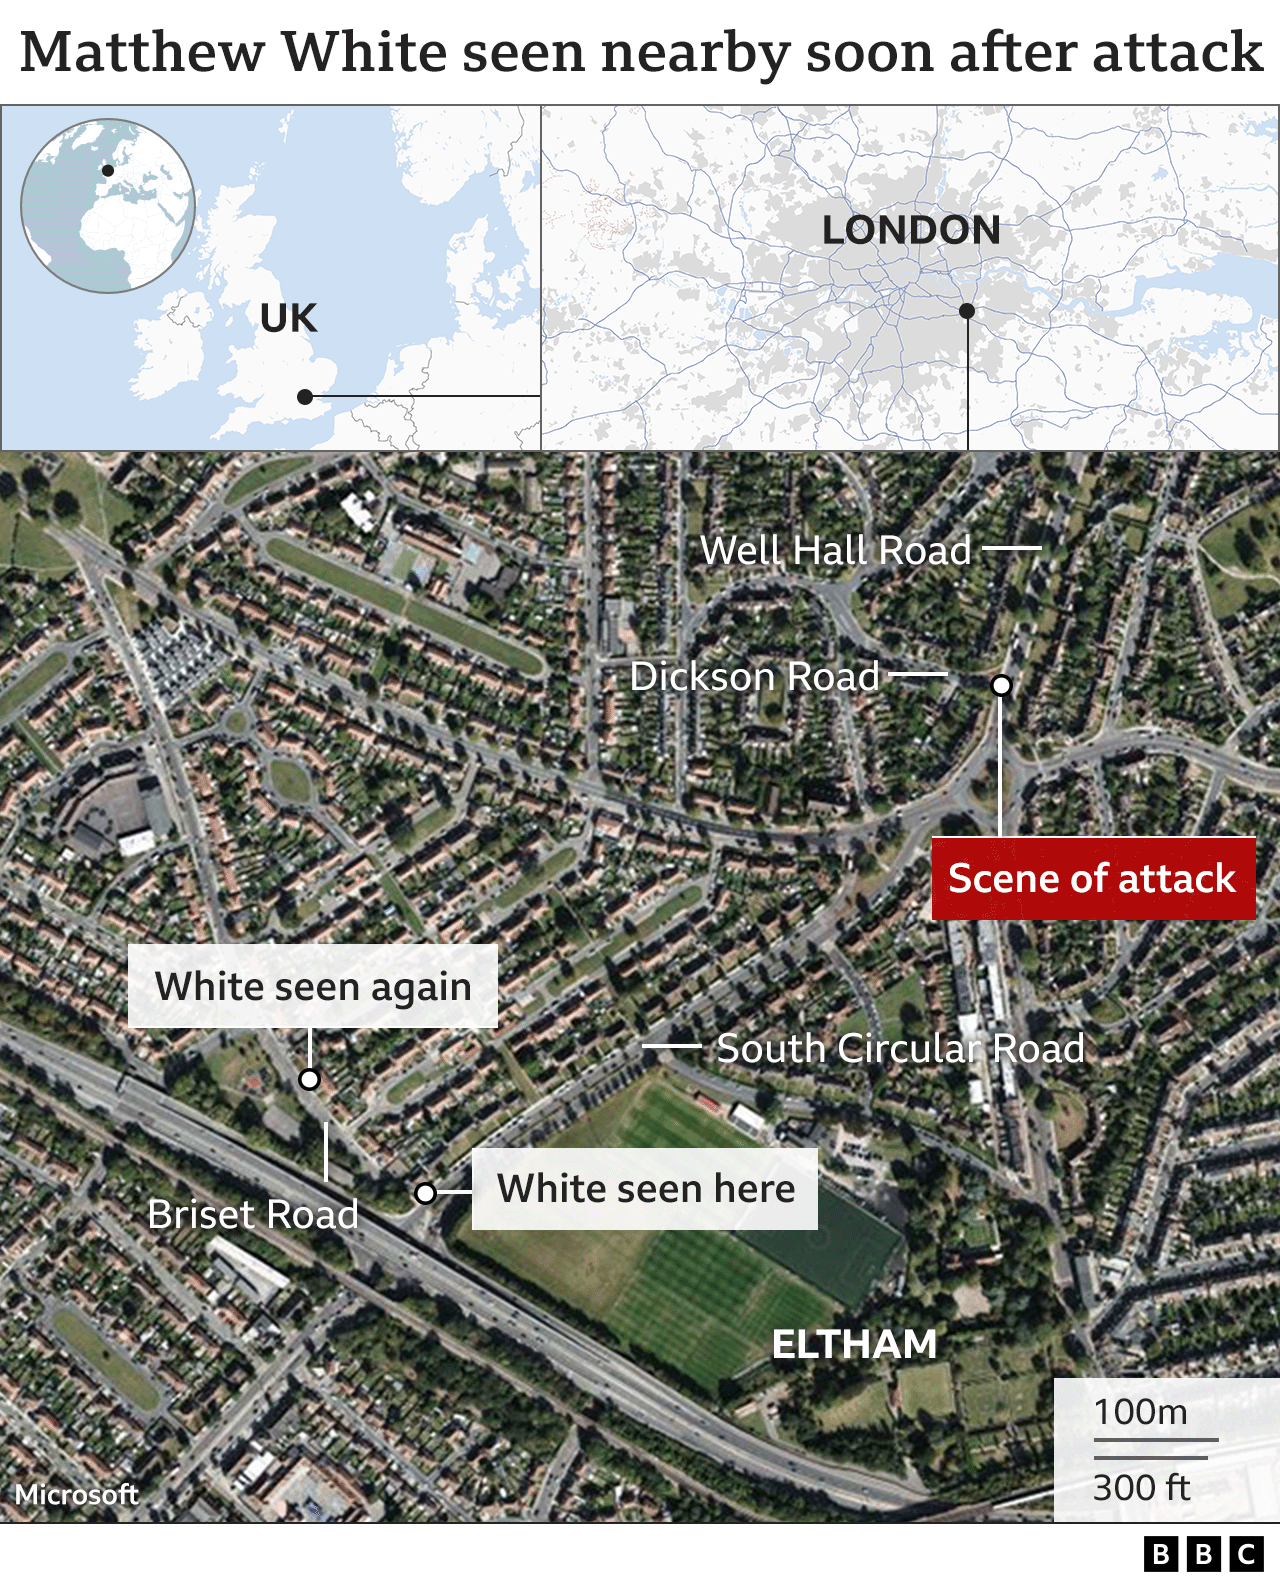 Map showing the scene of the attack on Stephen Lawrence and two nearby places in Eltham where Matthew White was seen